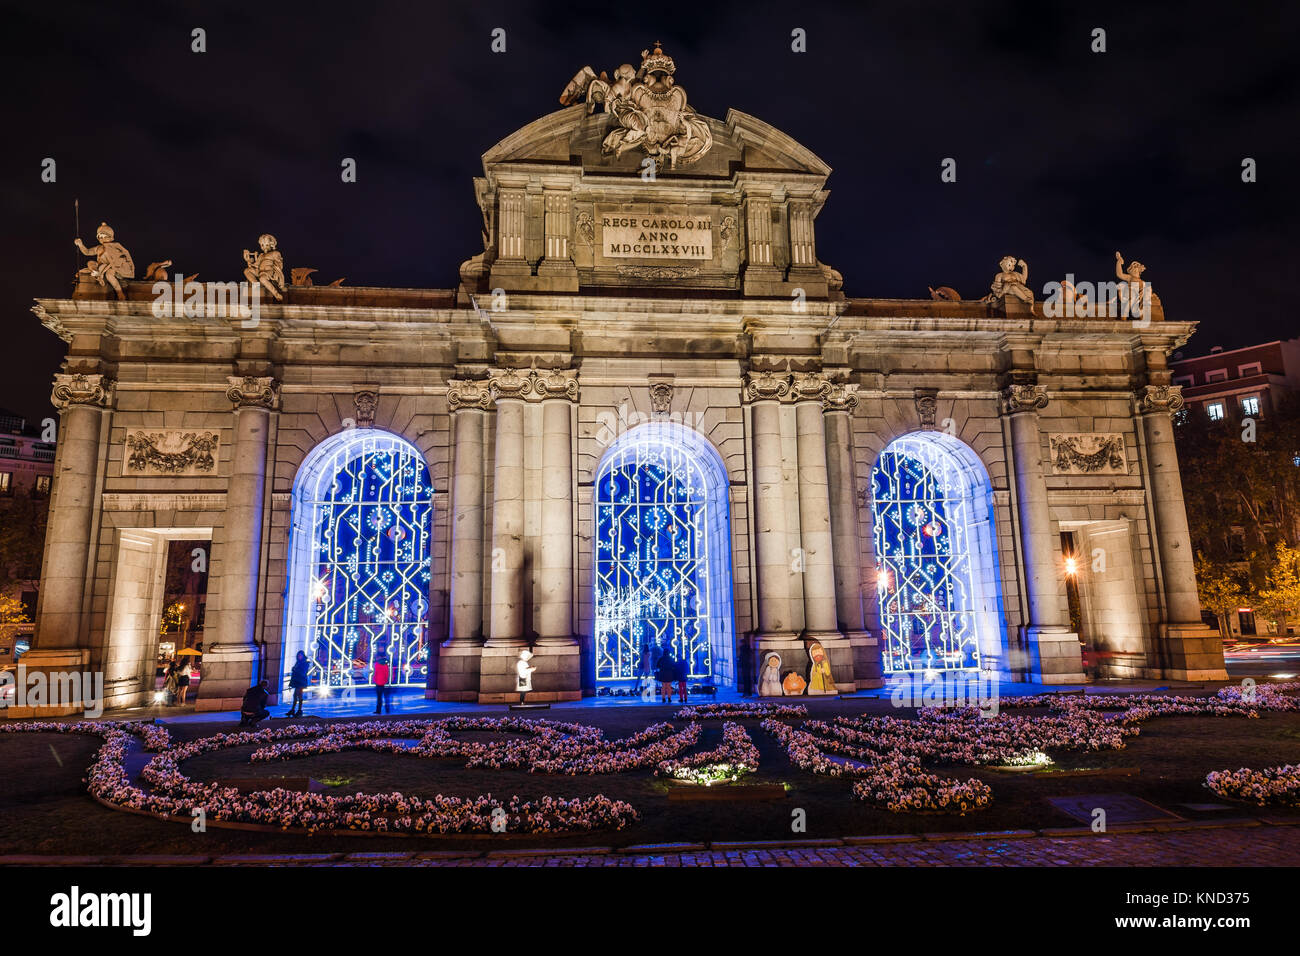 Puerta of Alcala in Madrid at night on Christmas time Stock Photo